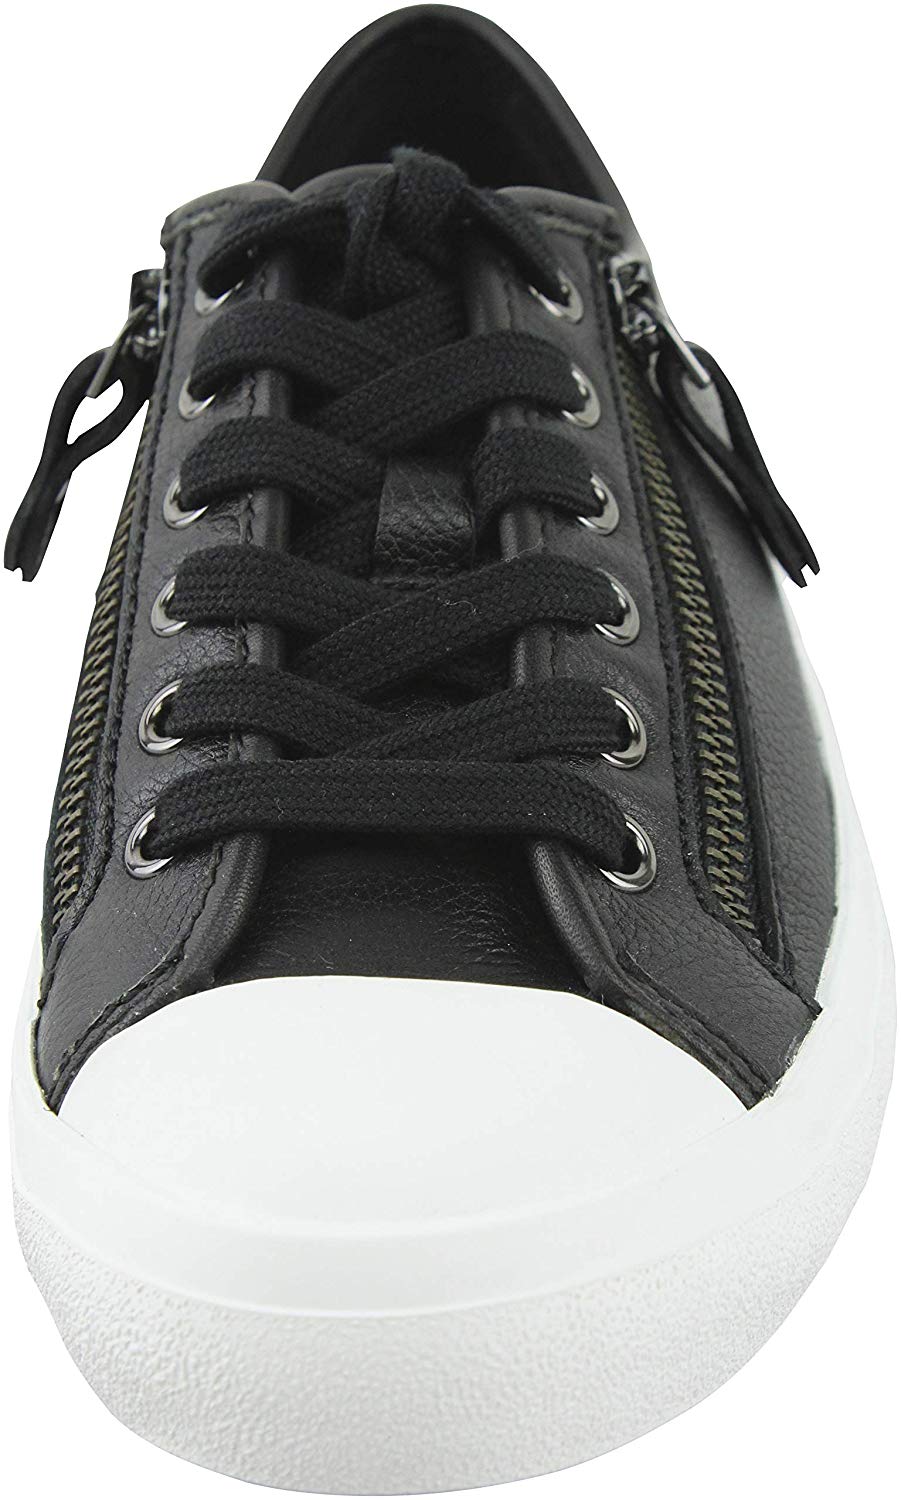 Coach Womens Empire Low Top Lace Up Fashion Sneakers ...